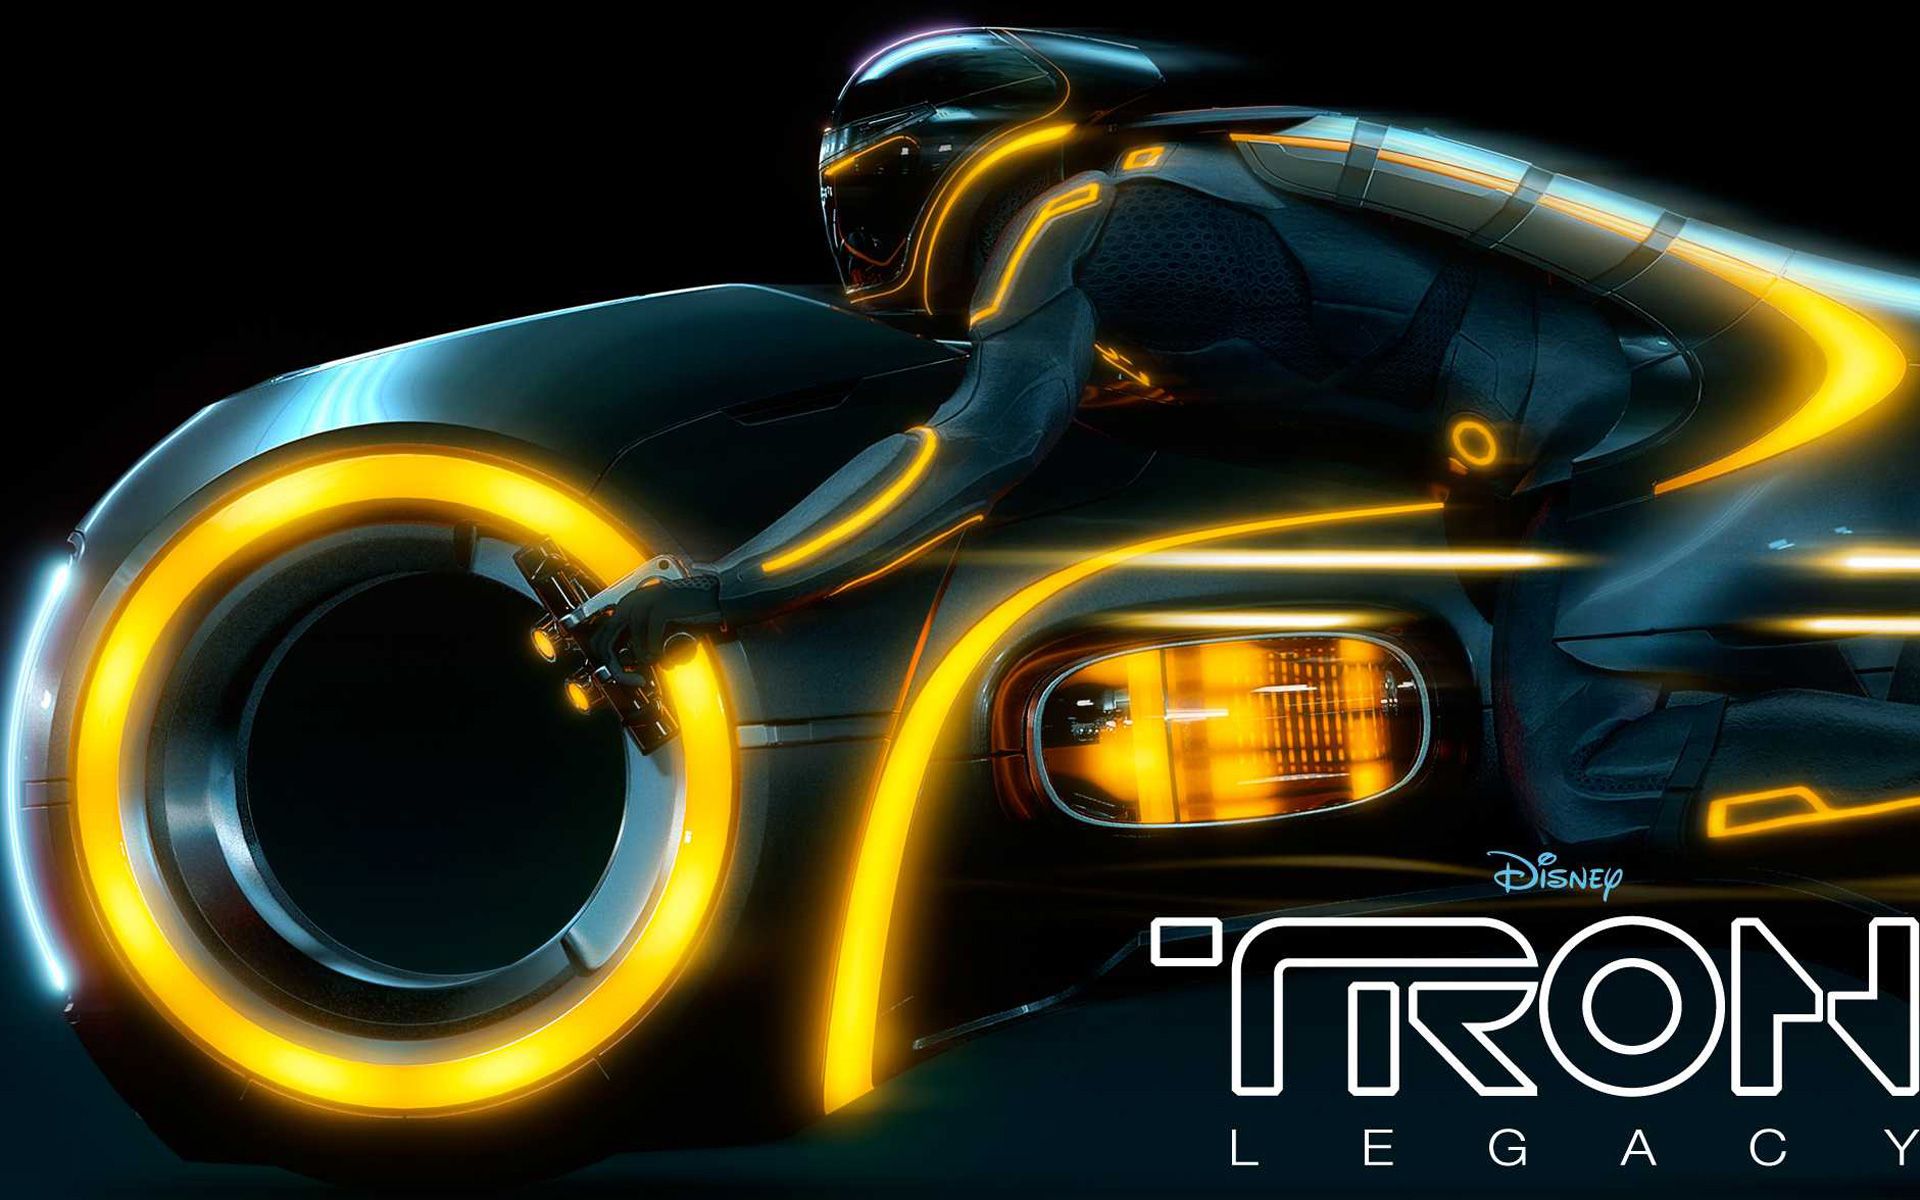 2010 Tron Legacy 2 Wallpapers | HD Wallpapers